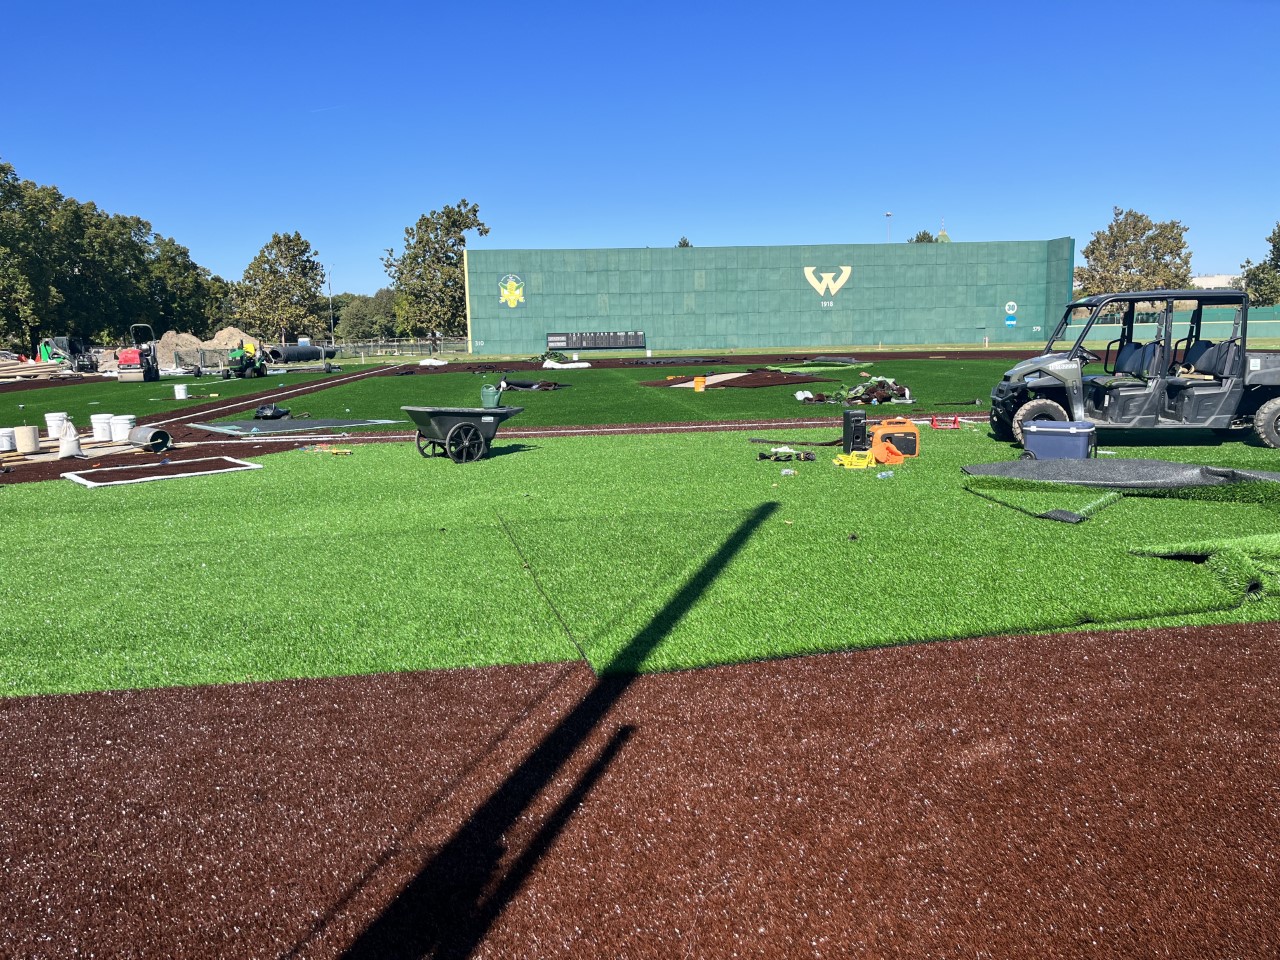 The new turf infield is installed at Harwell Field with equipment still on site.